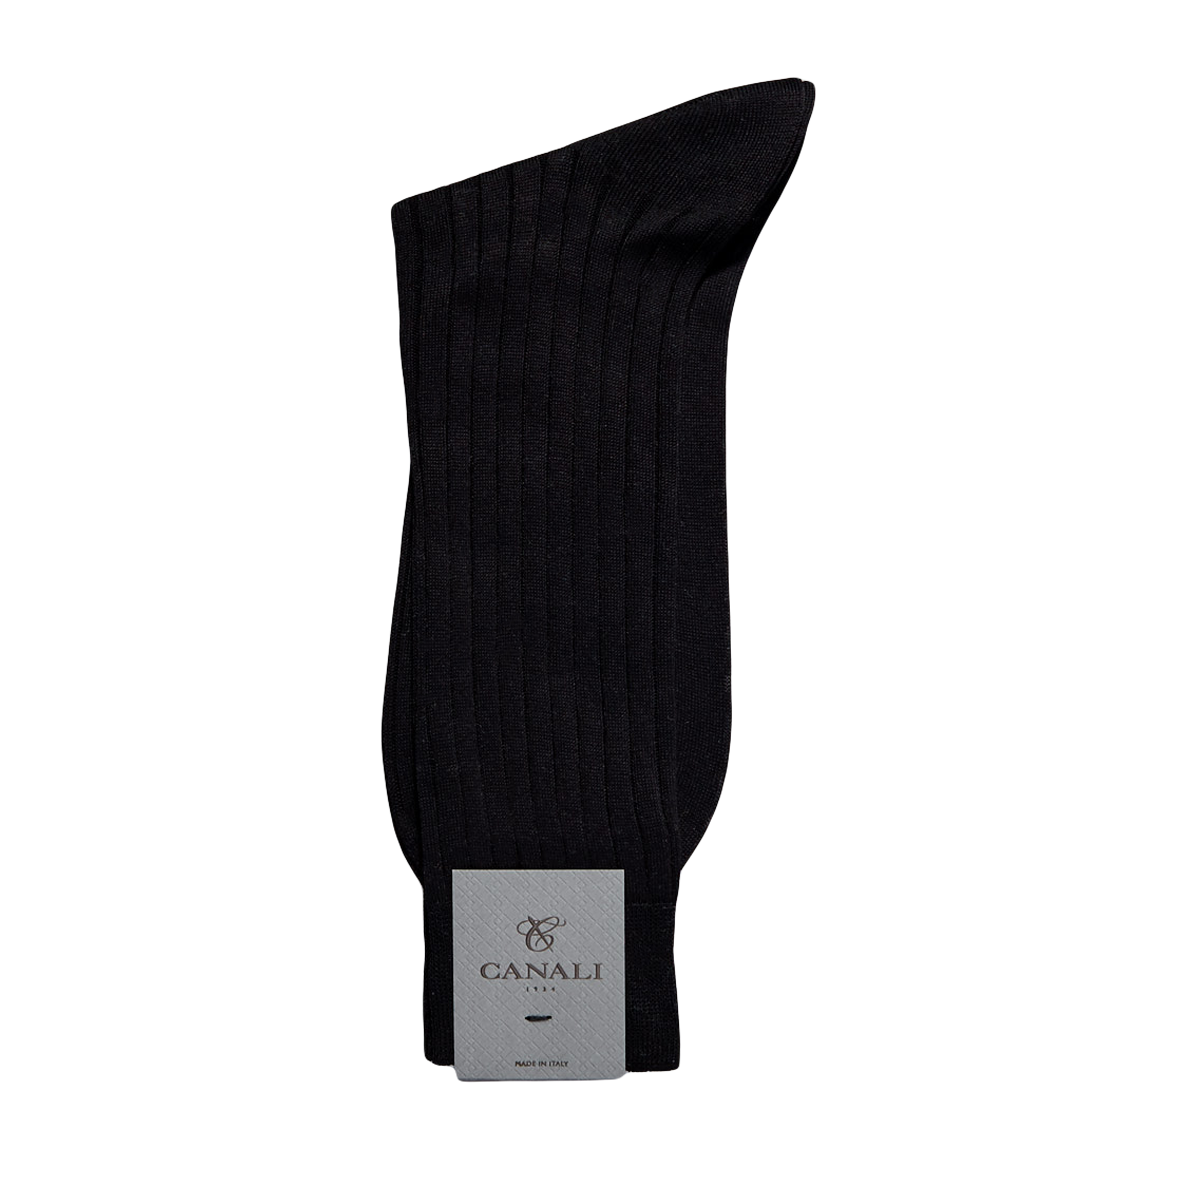 High-quality Canali Black Ribbed Cotton Socks with a hand-linked toe on a white background.